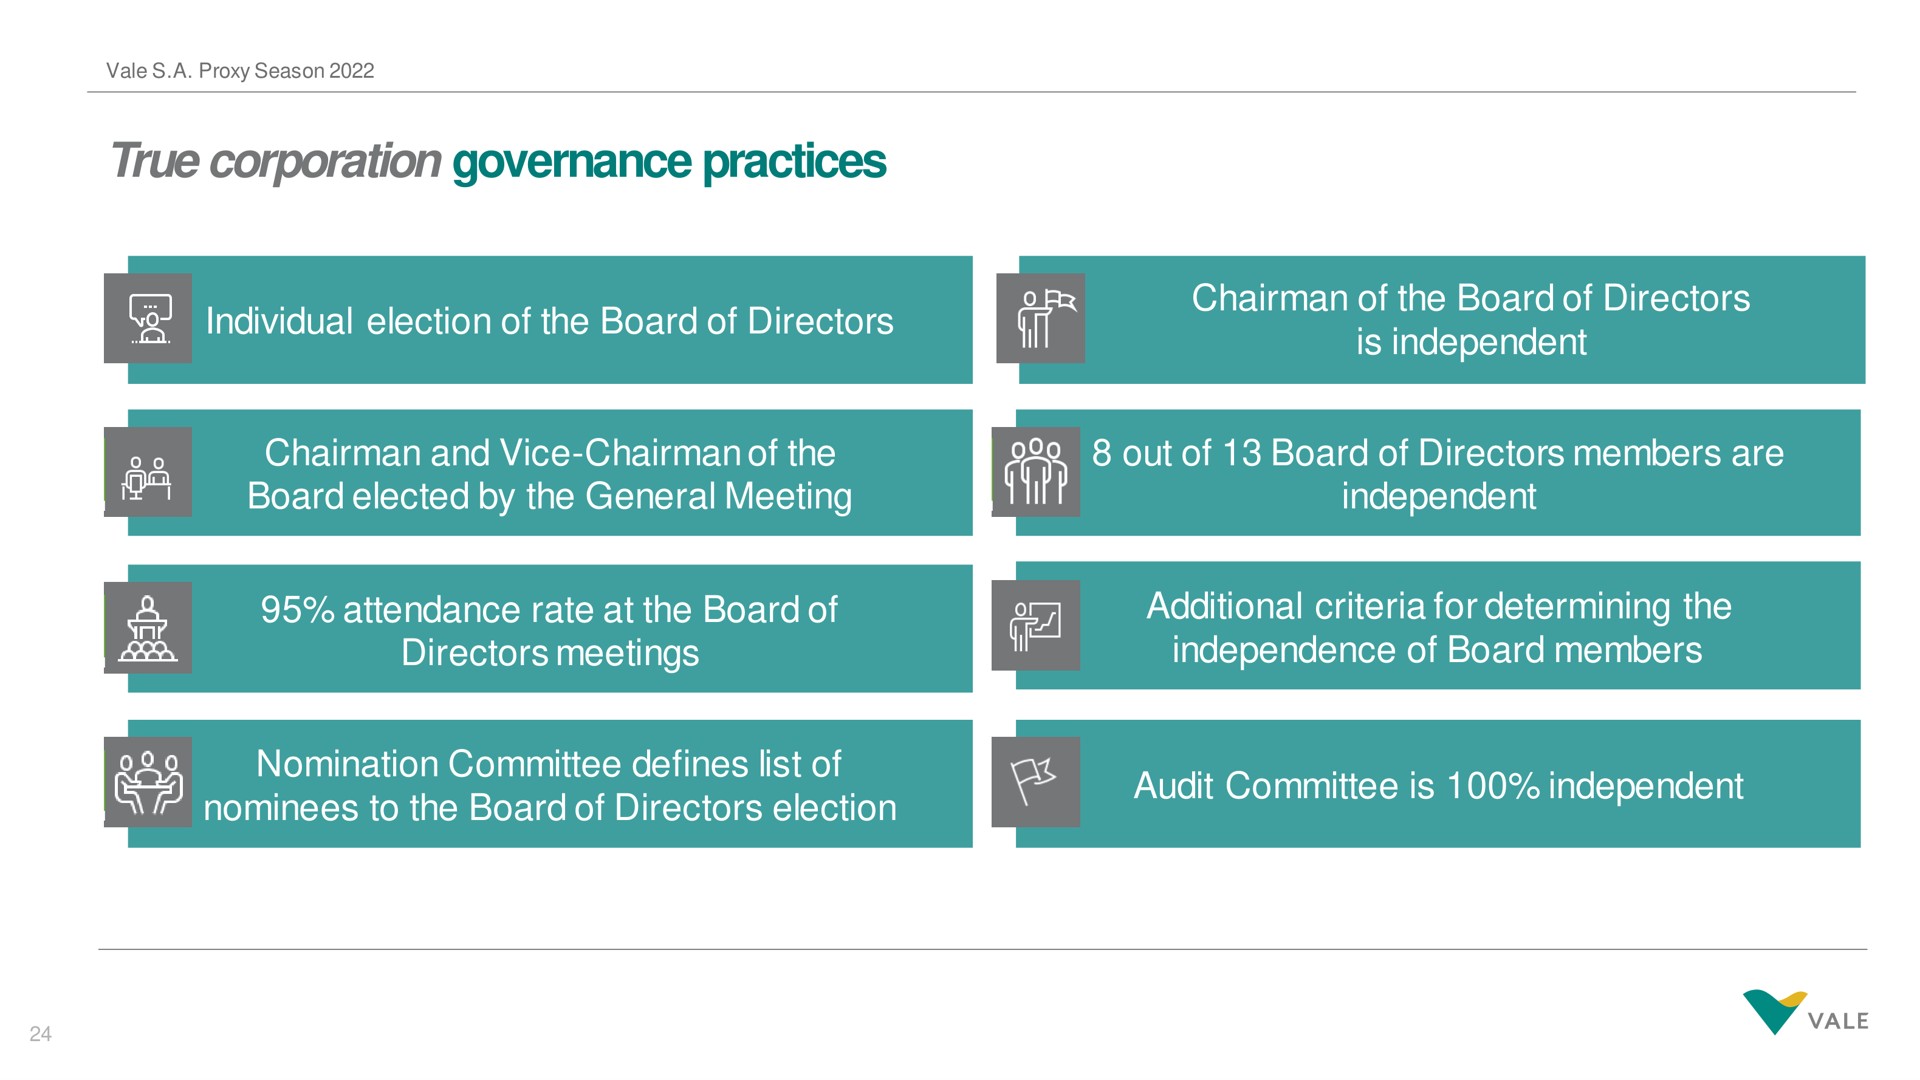 true corporation governance practices individual election of the board of directors tin chairman and vice chairman of the board elected by the general meeting a out of board of directors members are independent attendance rate at the board of directors meetings nomination committee defines list of a additional criteria for determining the independence of board members audit committee is independent | Vale